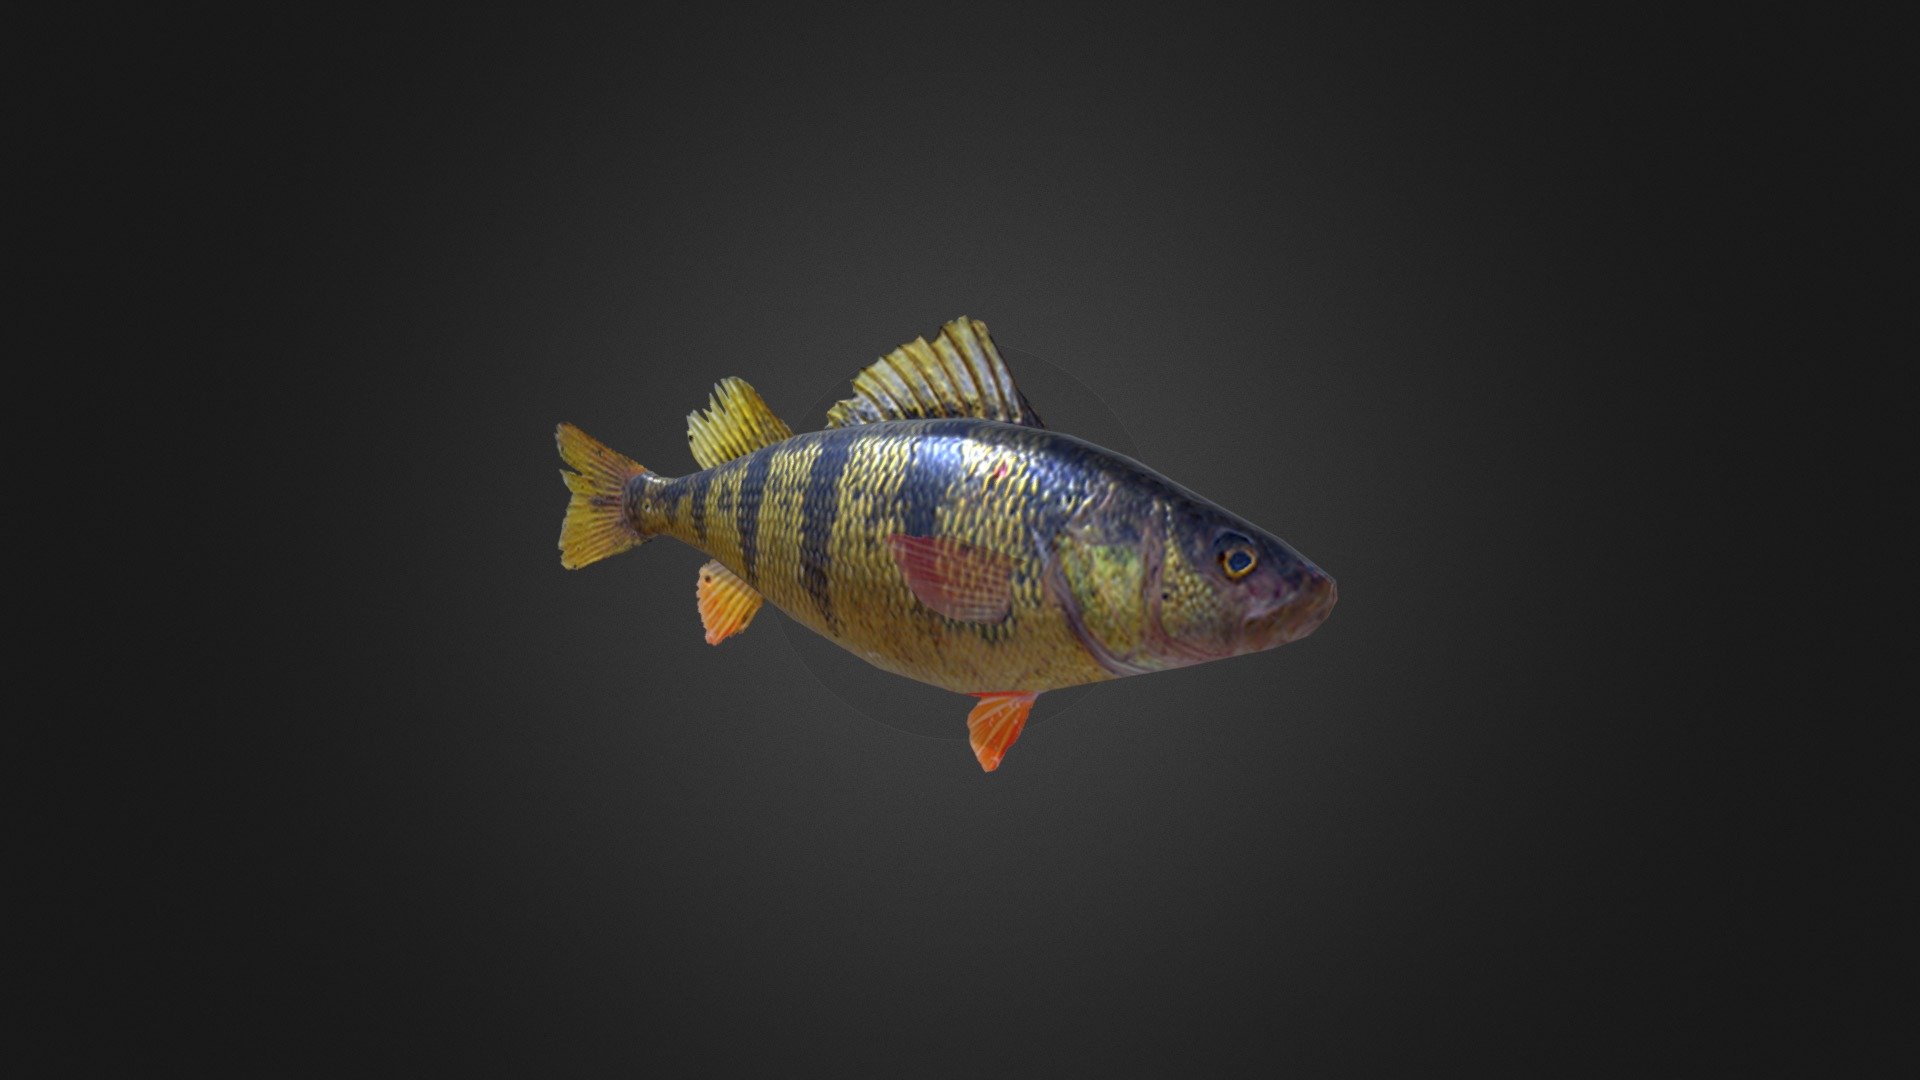 Very low-poly, optimized, simplistic perch model. Perfect for far/small views or using as a flock by duplicating the model or in 3D particle systems or for use on mobile games.
The model is rigged and weighed properly, ready to be animated using your software of preference. (The model does not contain animations; only rigging.)

Includes FBX, blend and collada formats, ambient occlusion and normal maps, and .psd files of the texture maps in case you wish to edit anything.

If you're having trouble importing it, check out my quick, simple step-by-step guides!


Unreal Engine 
Unity
Guide for Godot coming soon.

If you have any issues, questions or suggestions, feel free to send them at quimeliqolakorps@gmail.com! - Low-poly Perch - Buy Royalty Free 3D model by Lesen (@lance64) 3d model